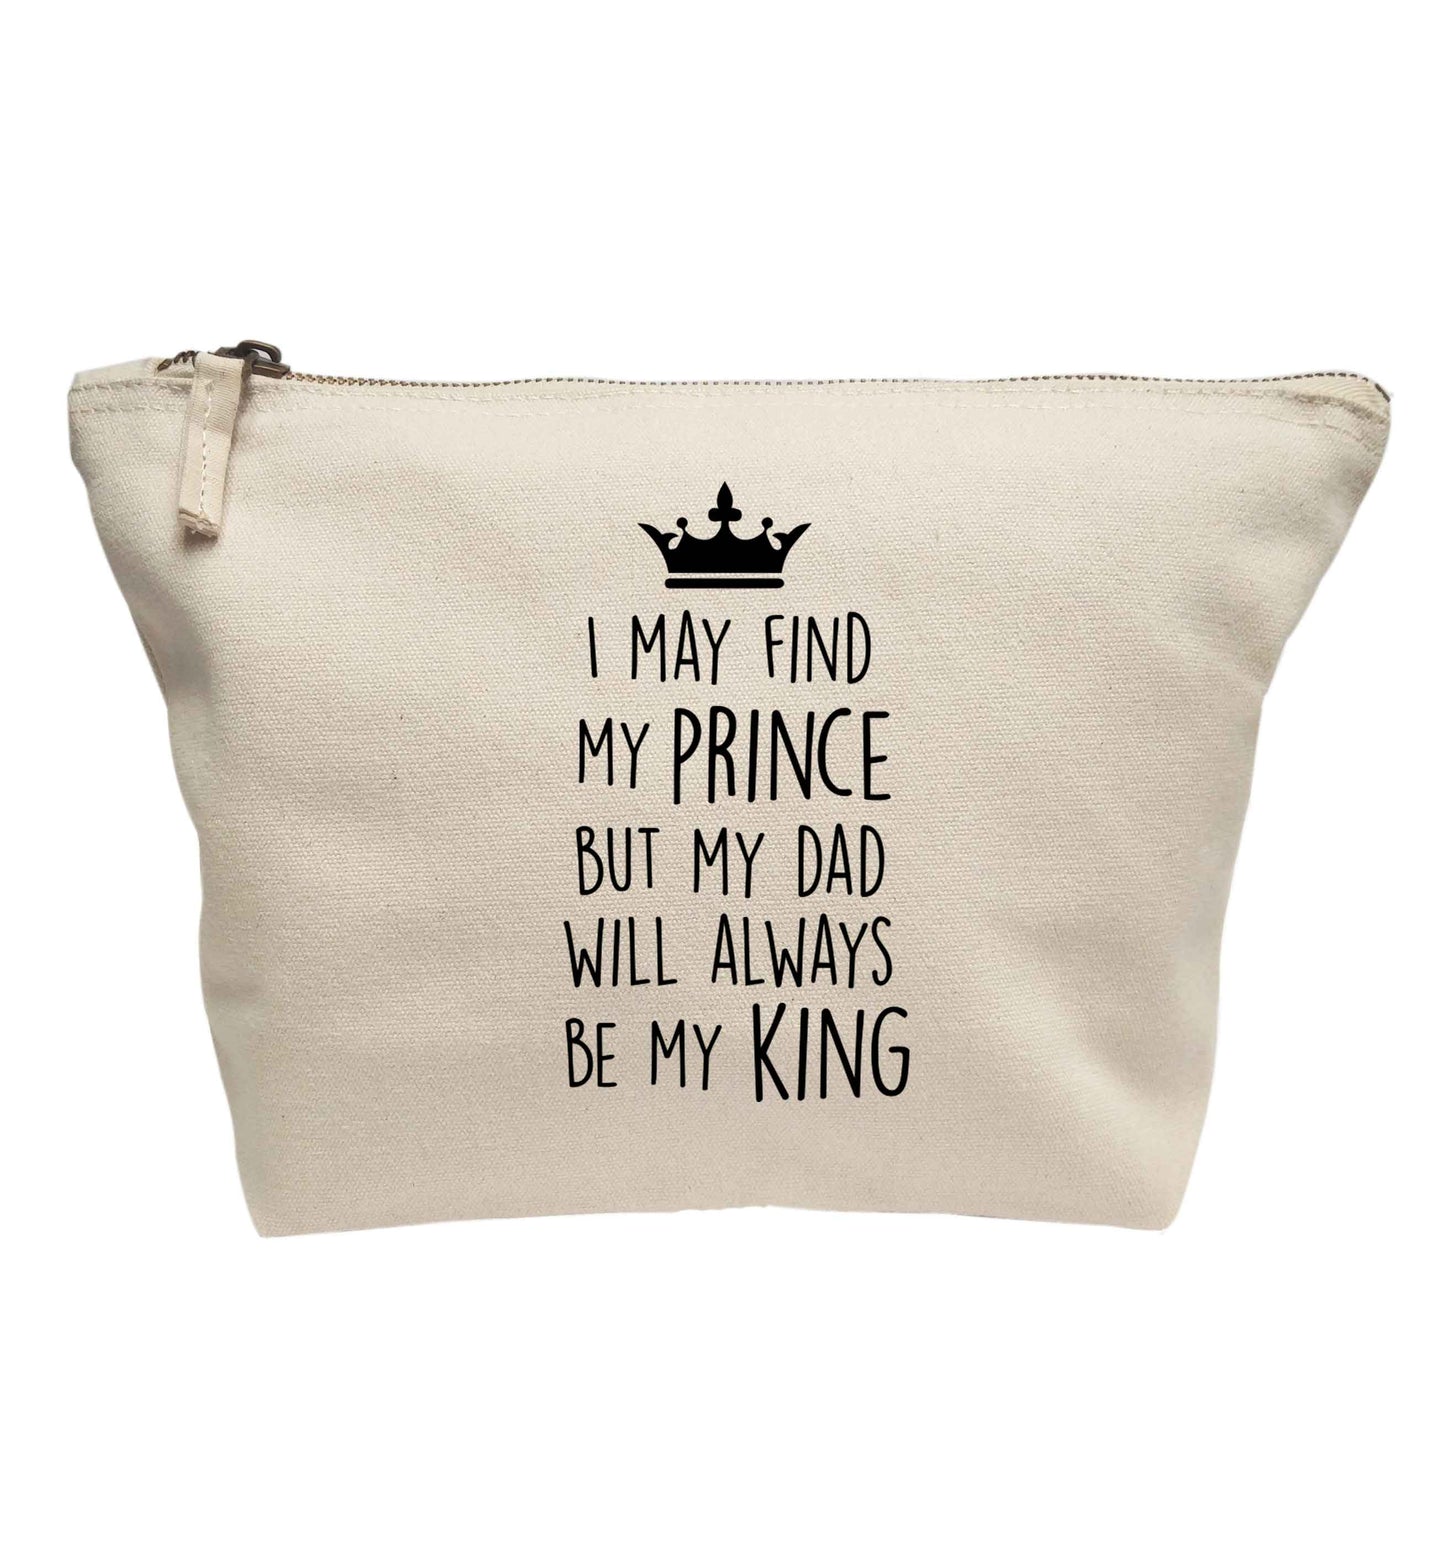 I may find my prince but my dad will always be my king | Makeup / wash bag